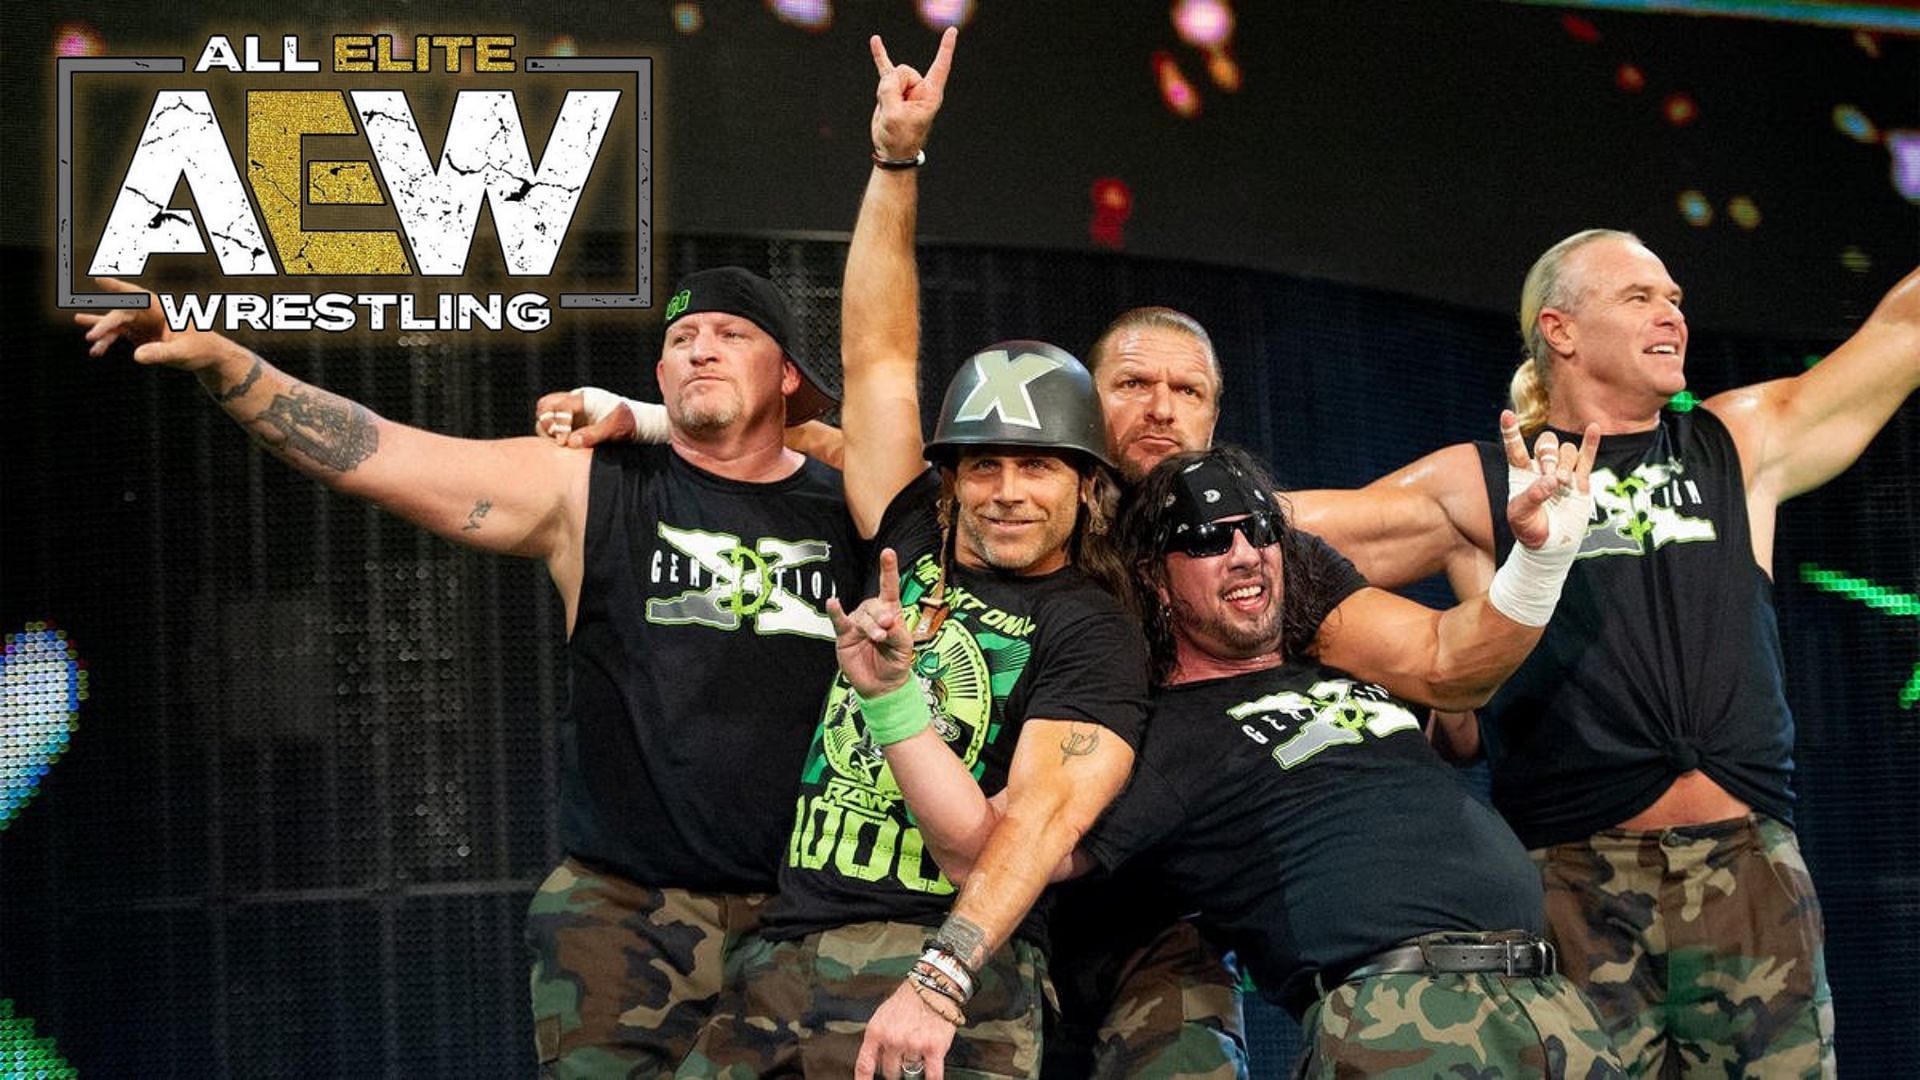 The DX Generation was recently referenced by an AEW star!